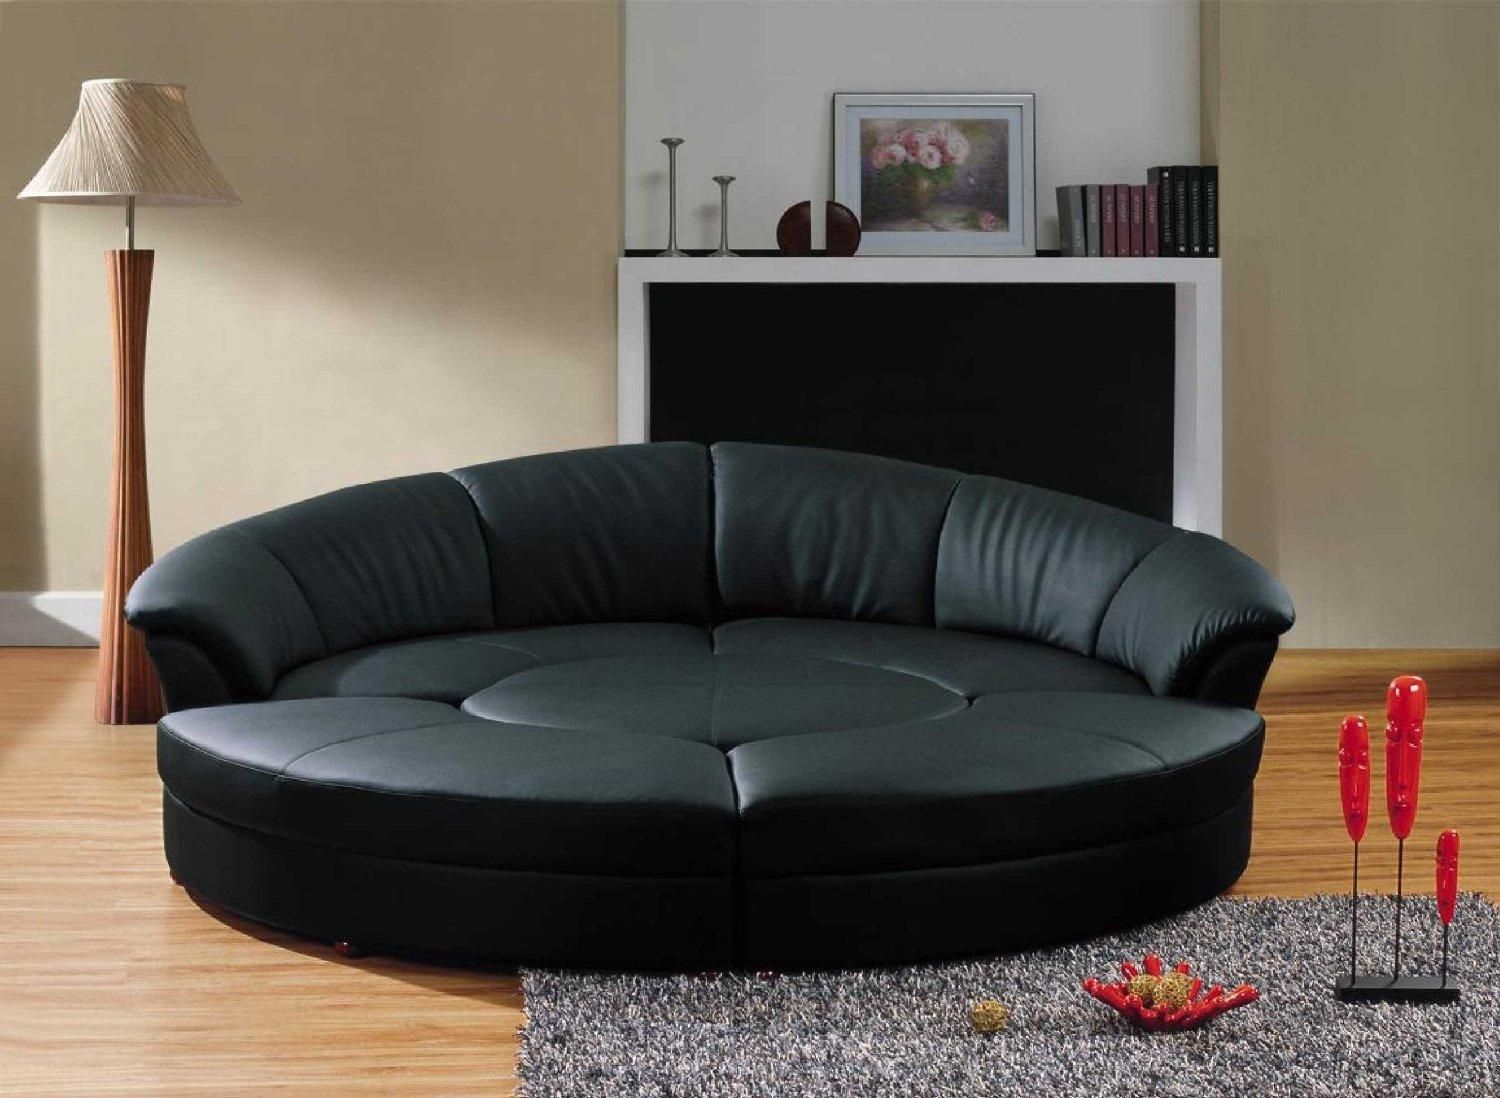 Marvelous Round Sofa Chair For Styles Of Chairs With Additional 45 Inside Circle Sofa Chairs (View 5 of 20)